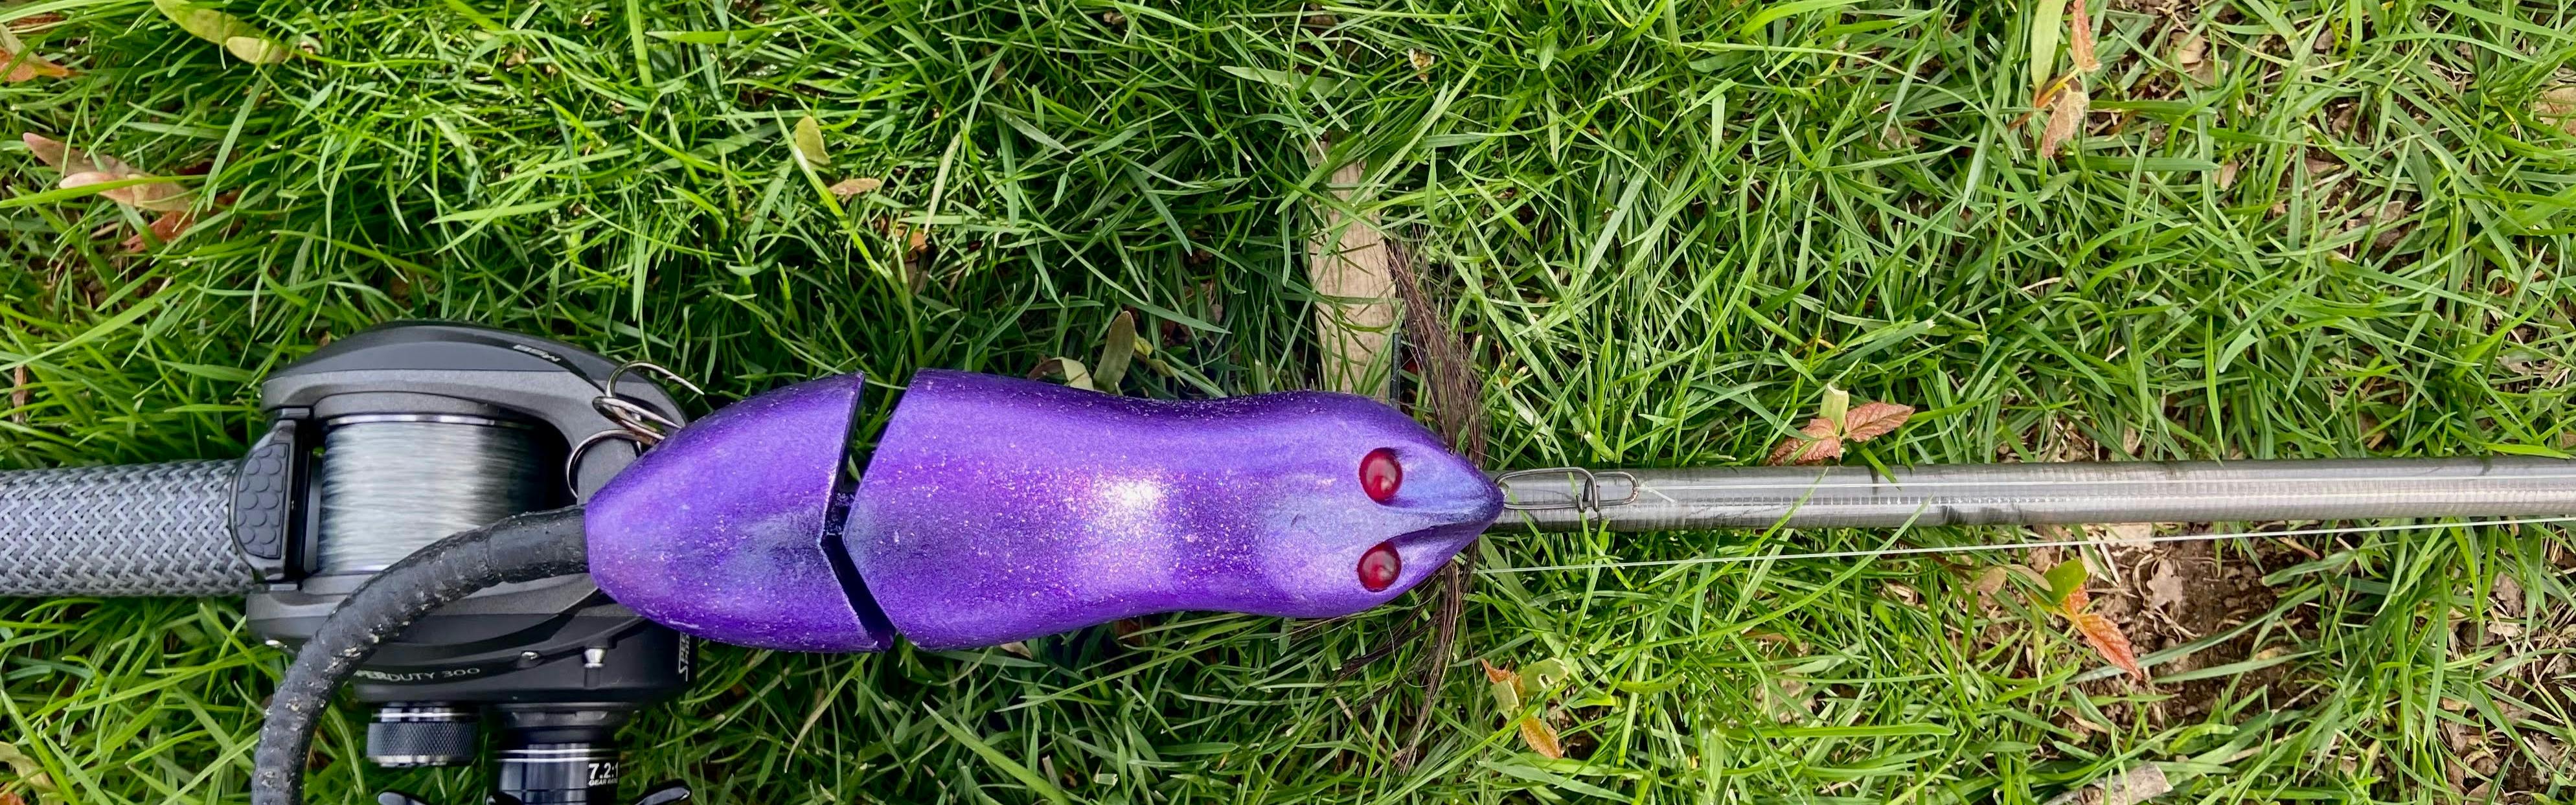 A purple lure attached to a fishing rod.